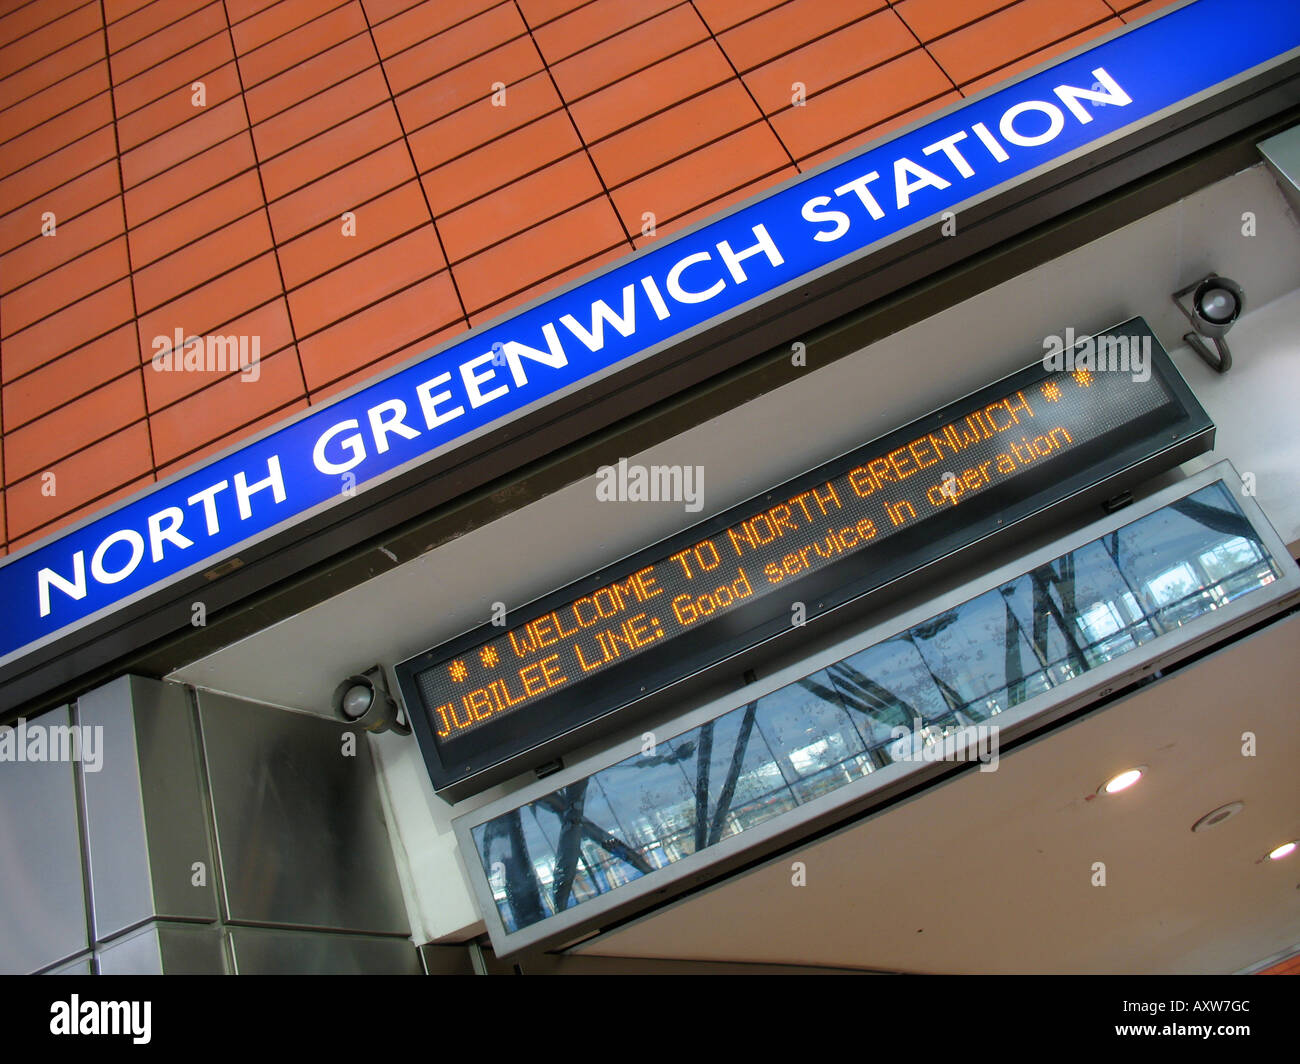 North Greenwich station sign London England Stock Photo